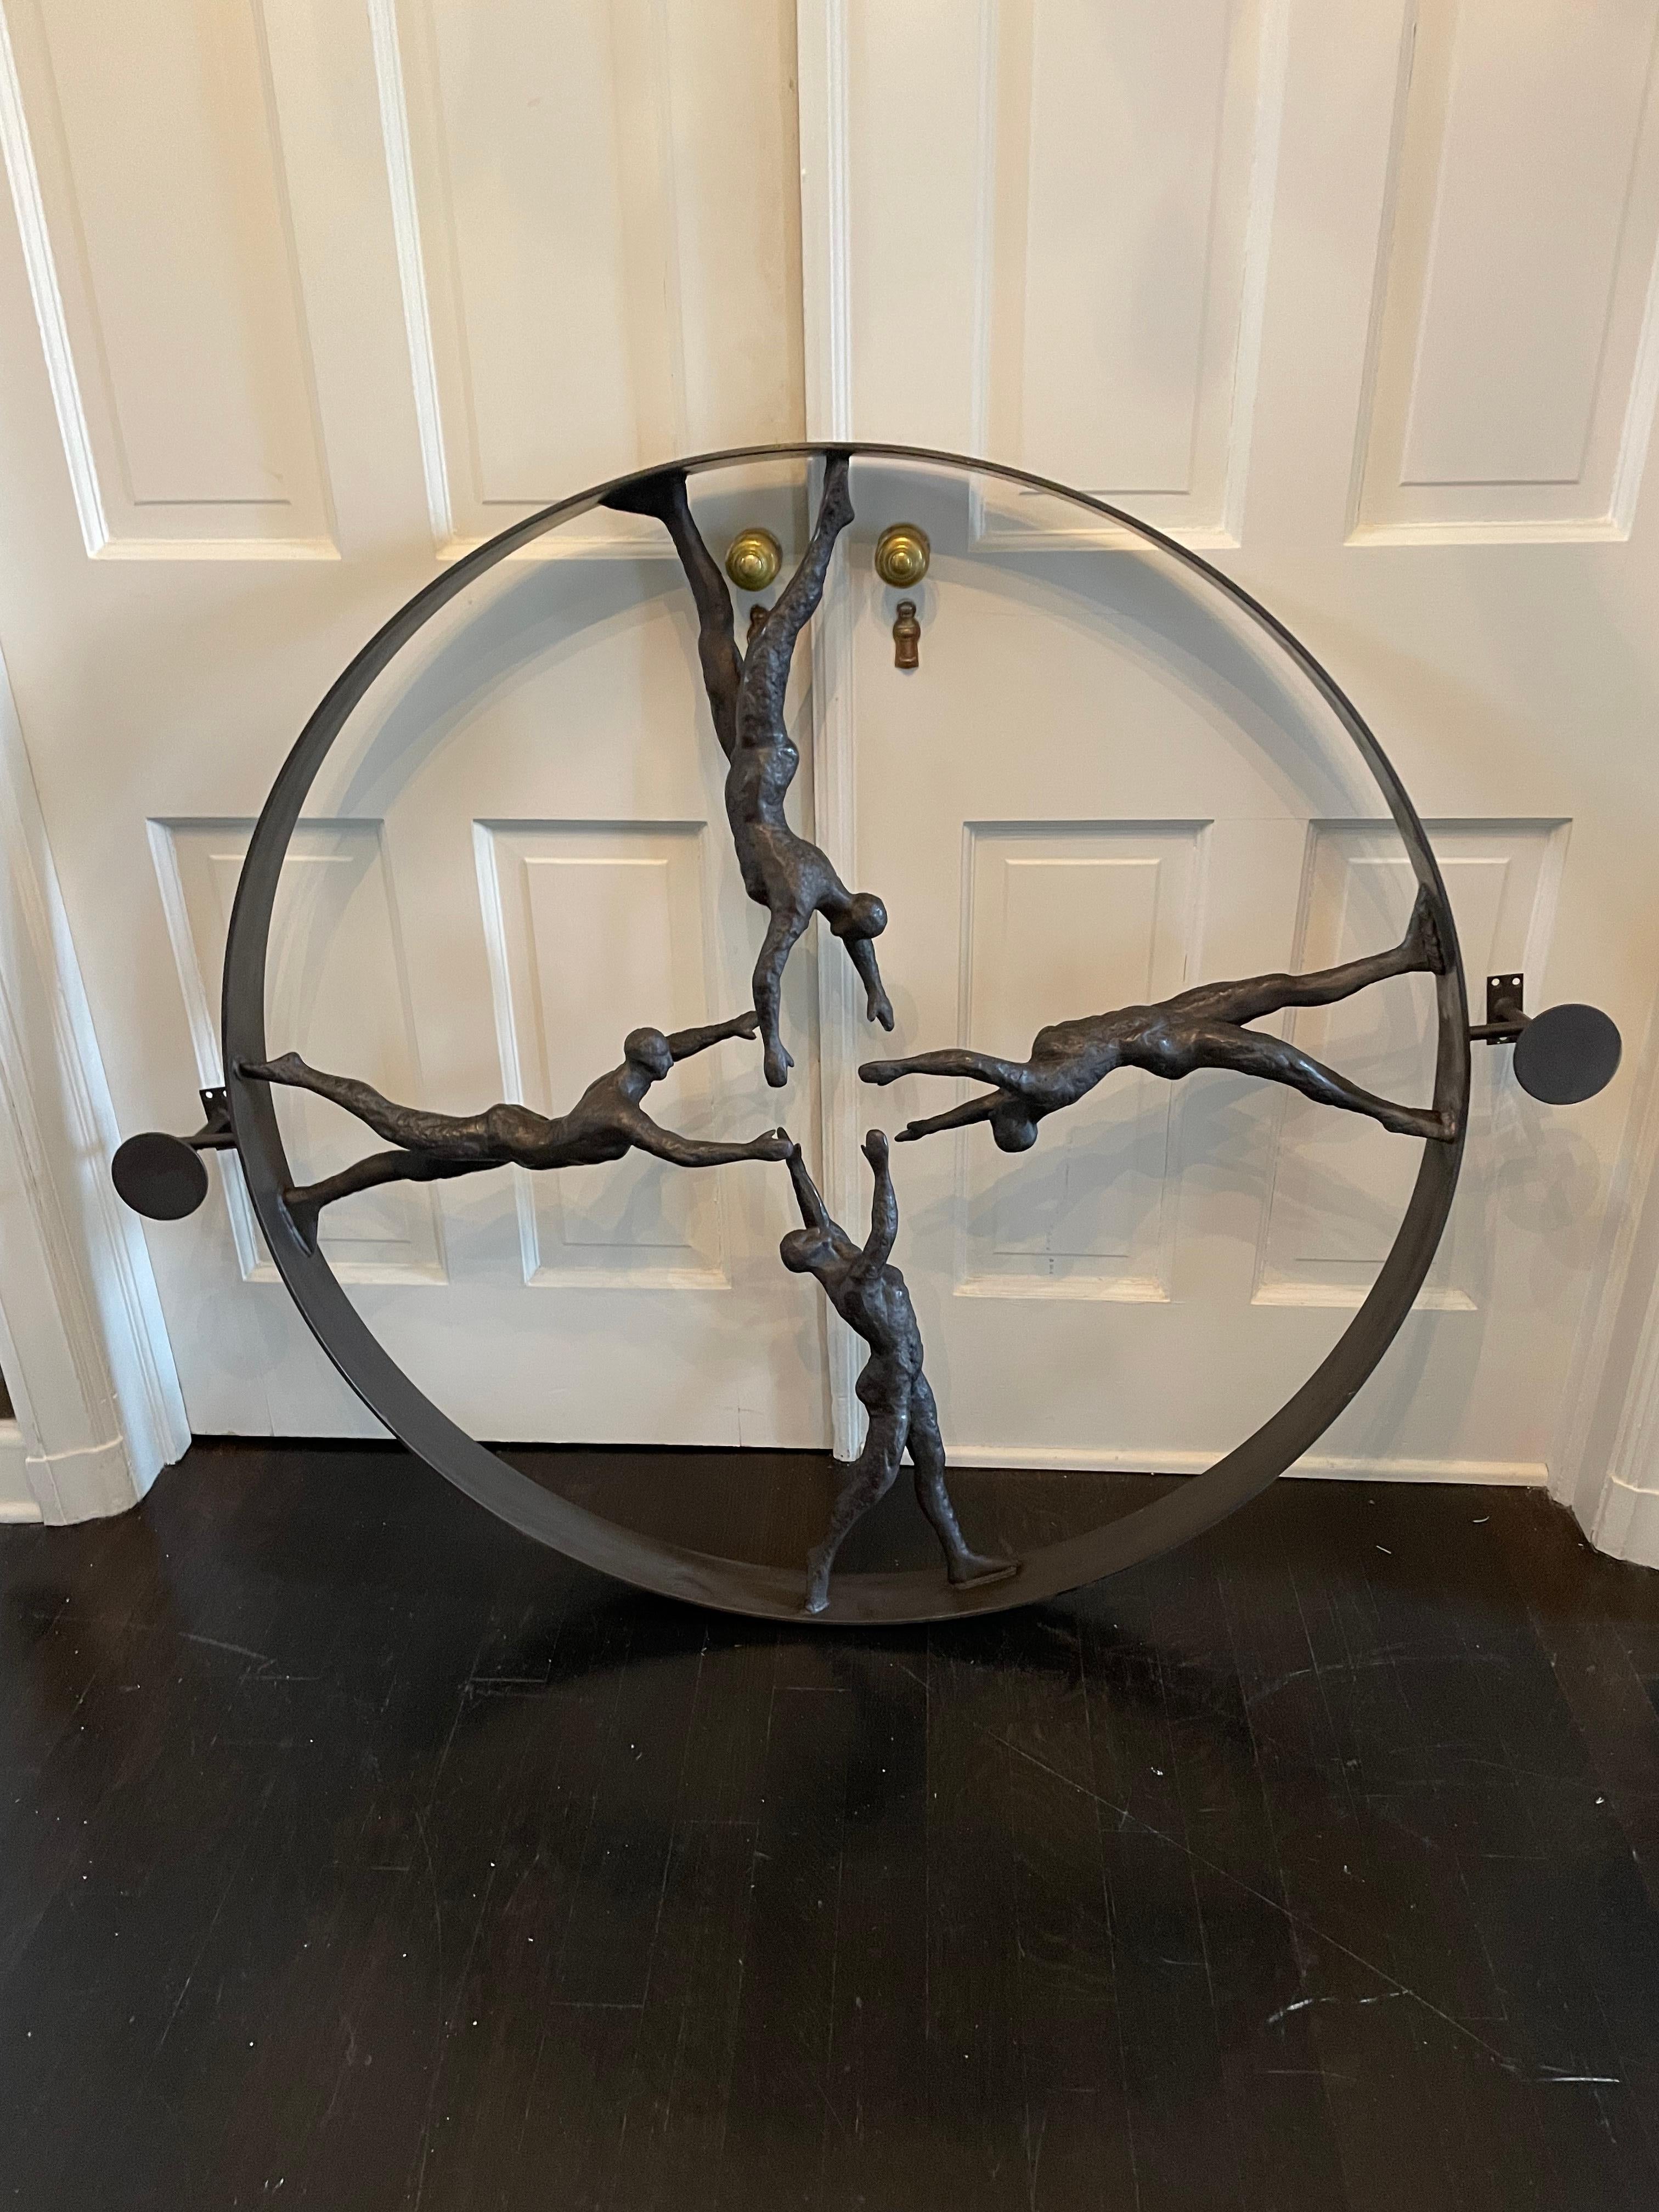 Striking and dramatic round iron wall sculpture having figures with arms extended toward the center of the circle in marvelous gestural poses. Hand forged iron.